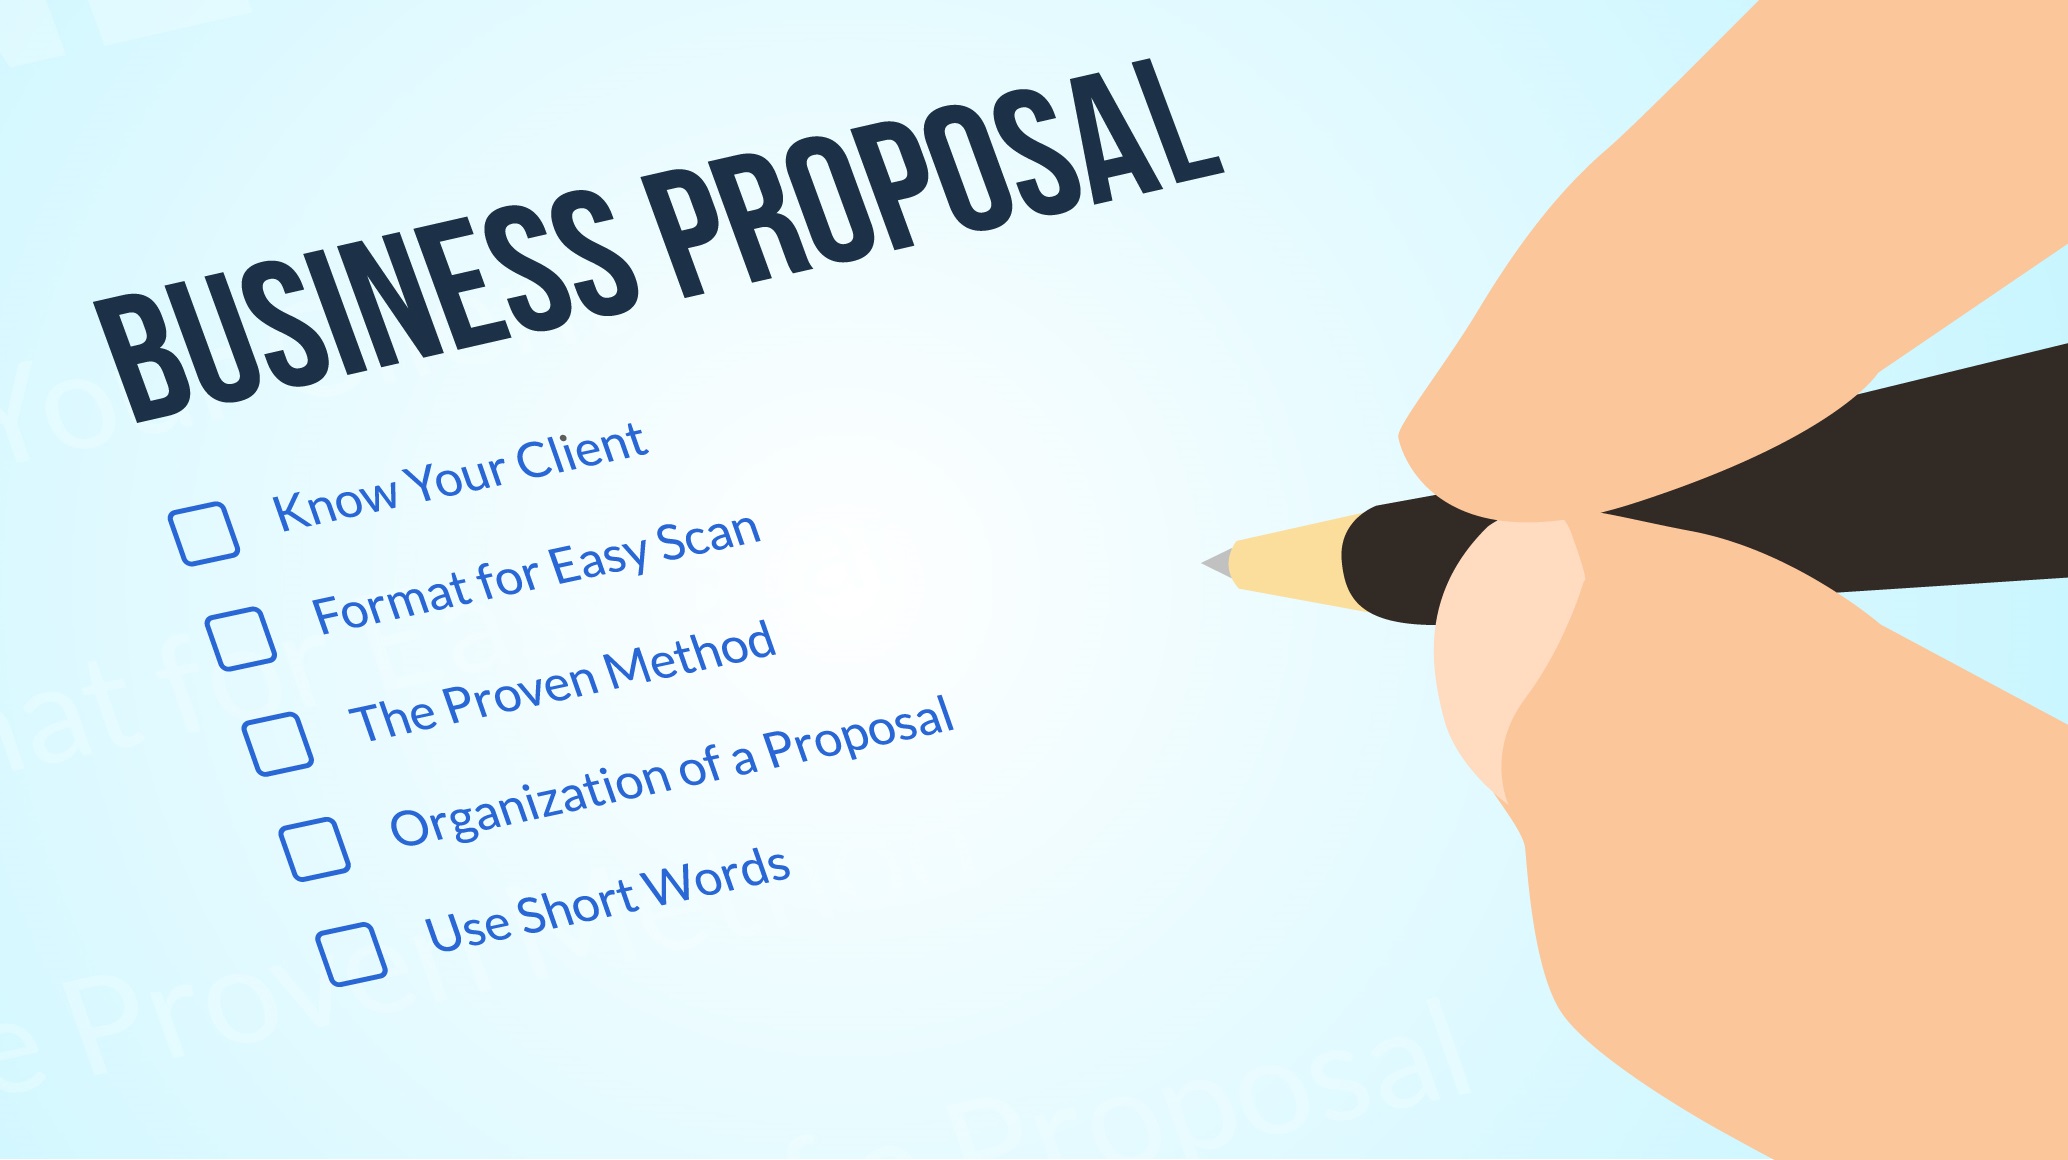 How to write winning Business proposals for your clients